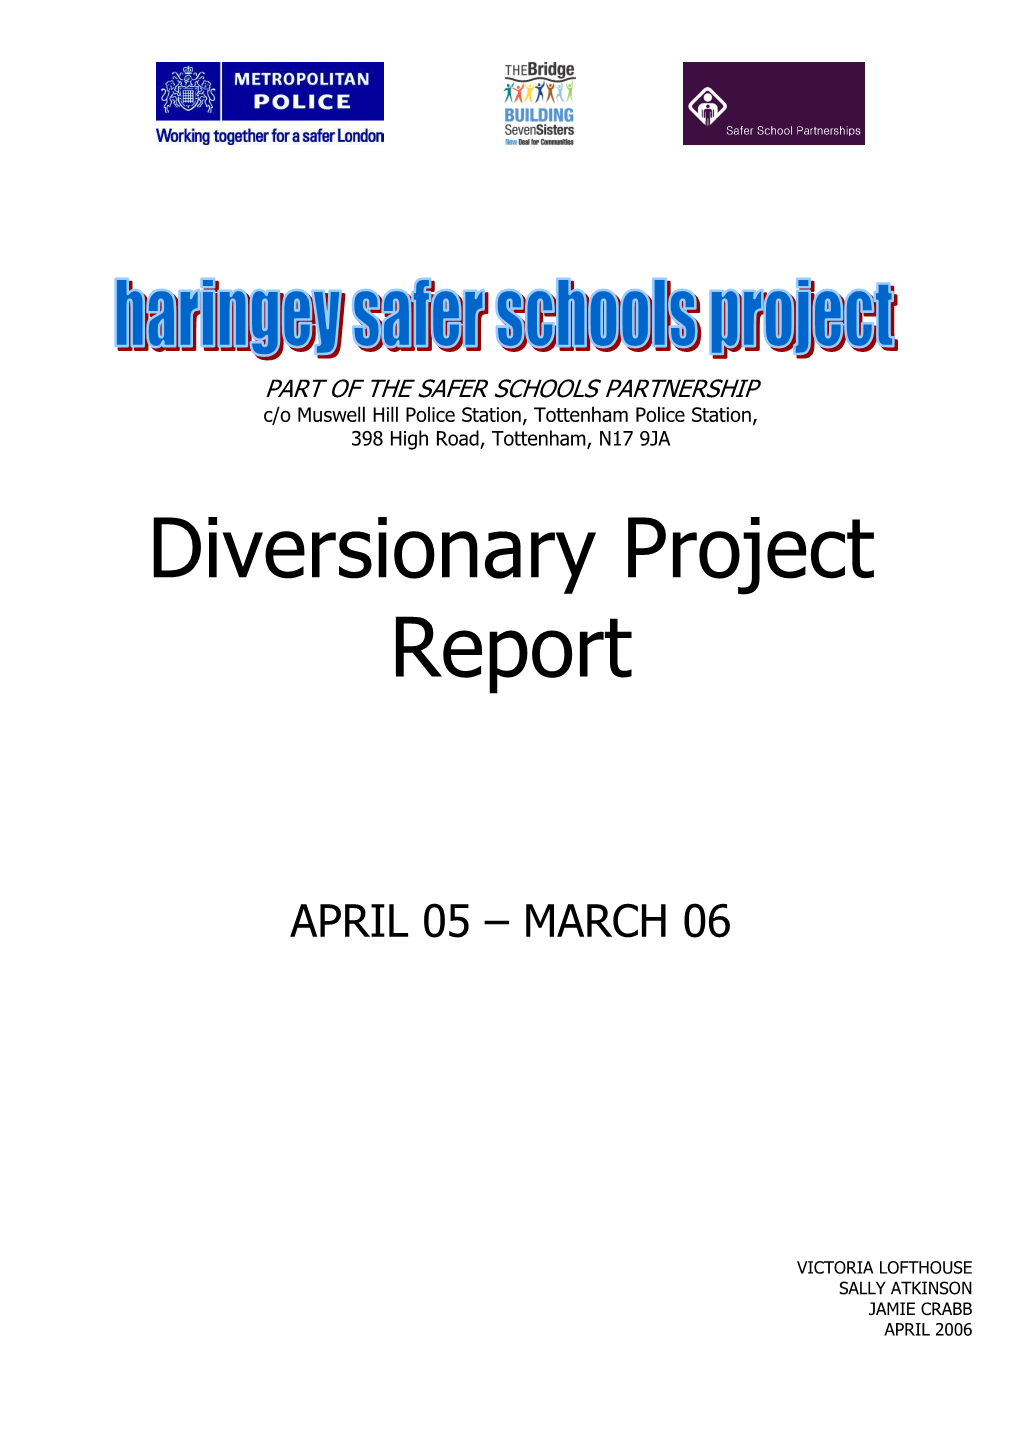 Diversionary Project Report